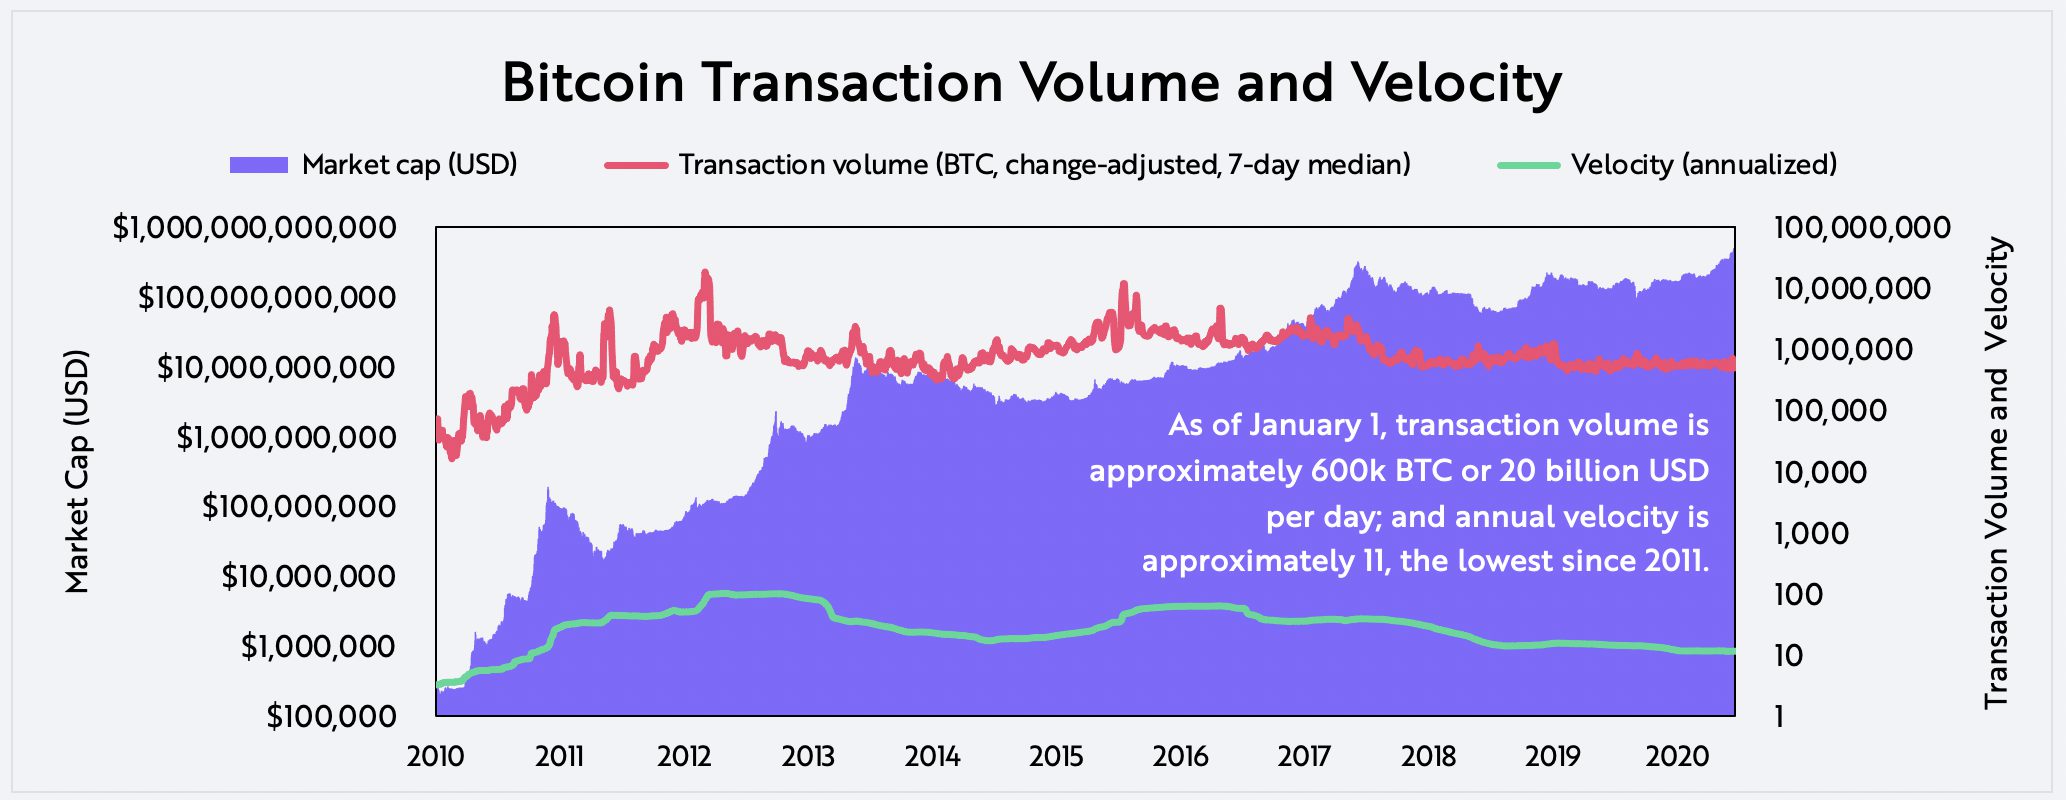 Evaluating Bitcoin Transaction Volume and Velocity on-chain data